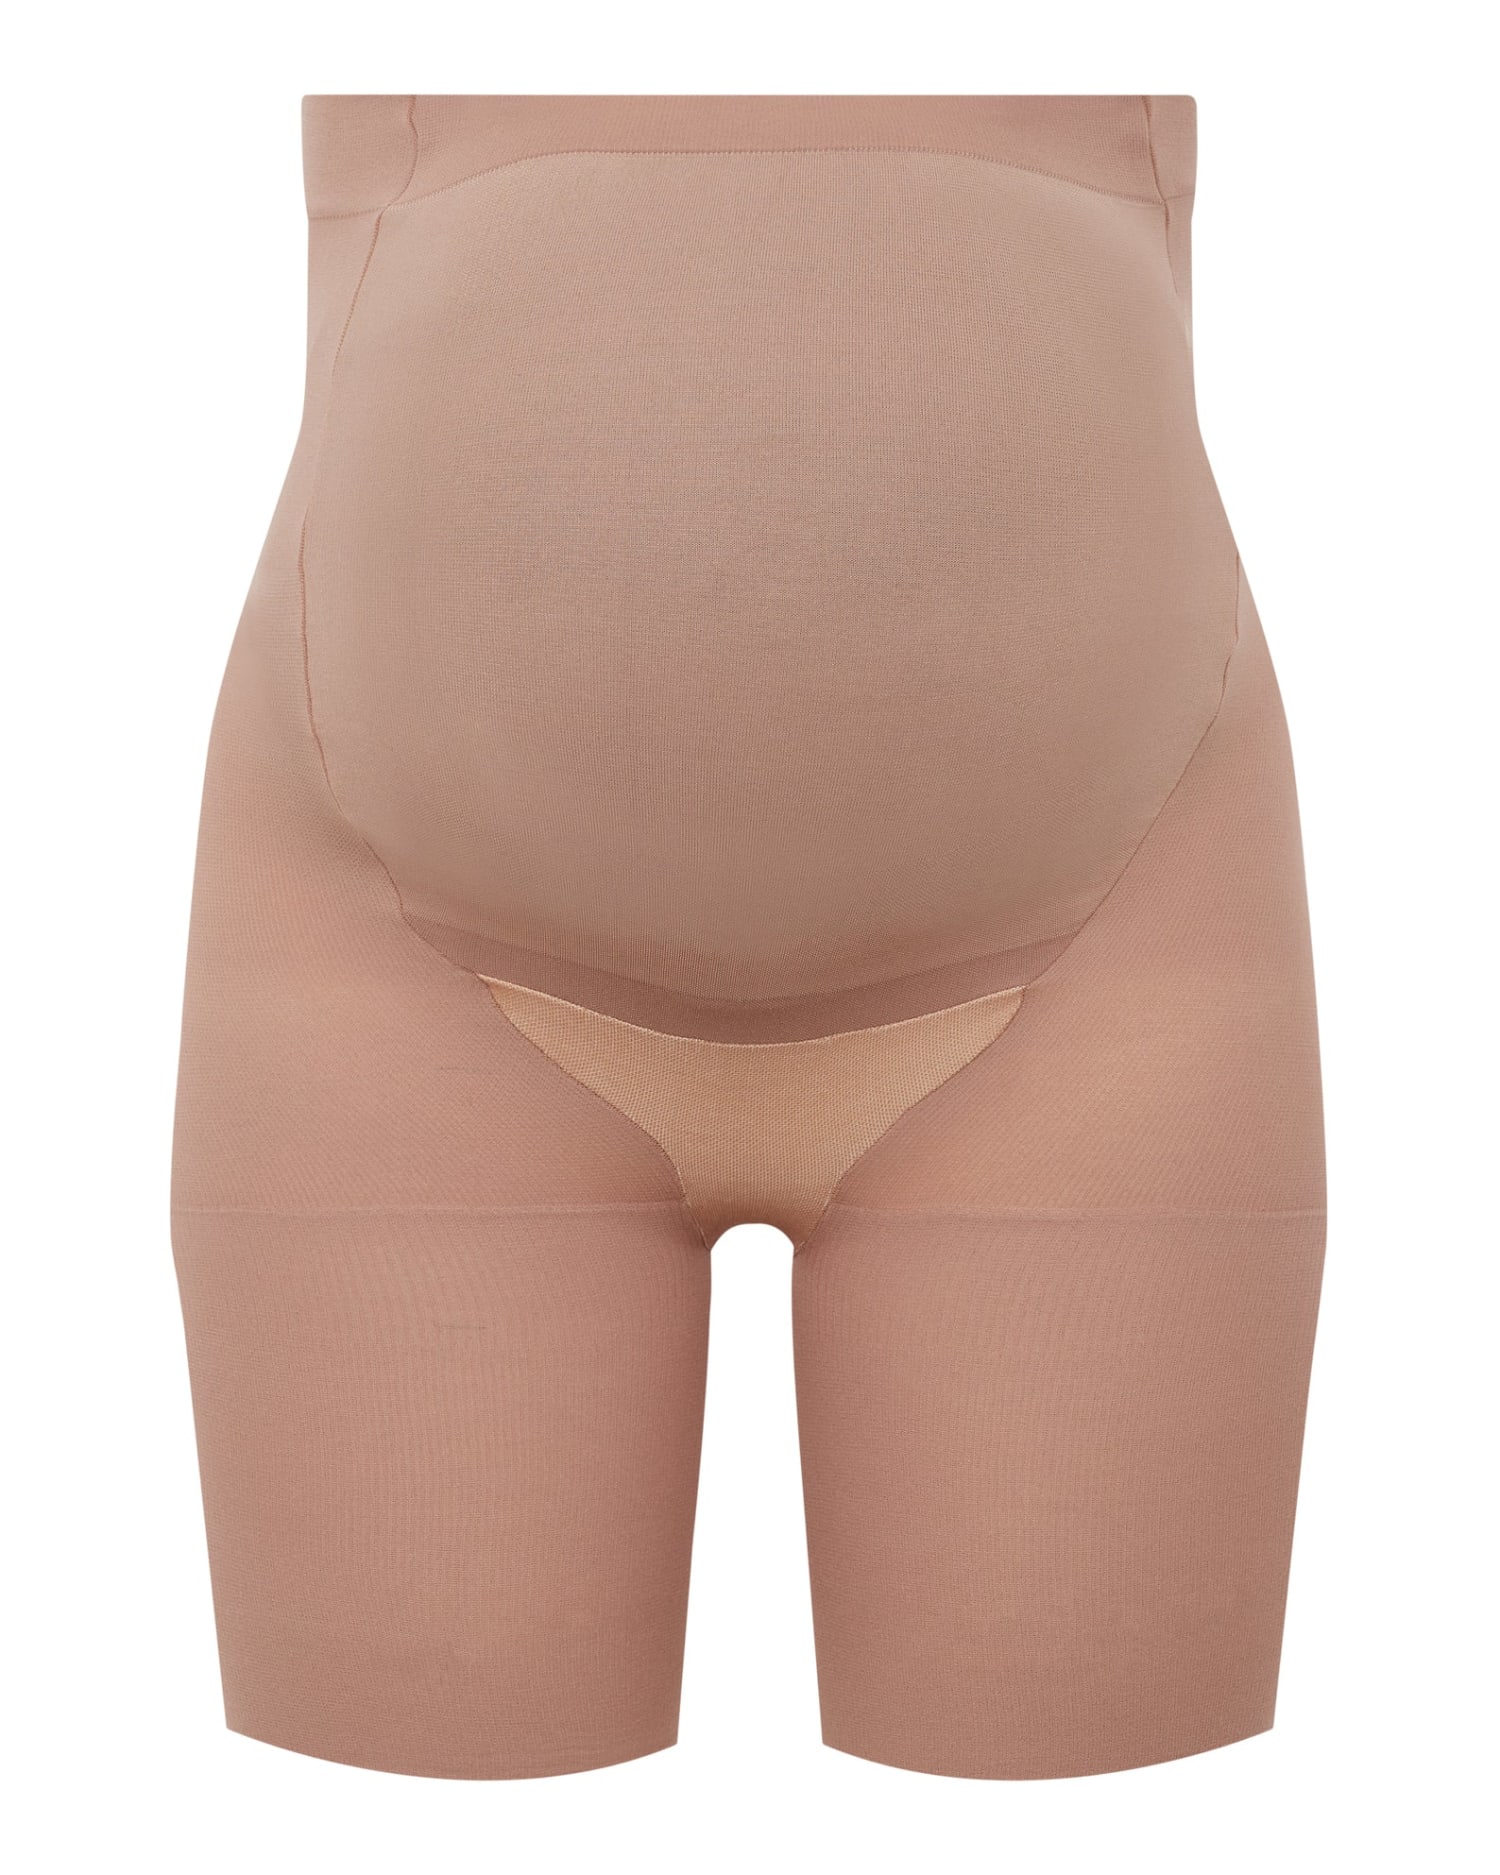 Find Cheap, Fashionable and Slimming lower belly girdle 